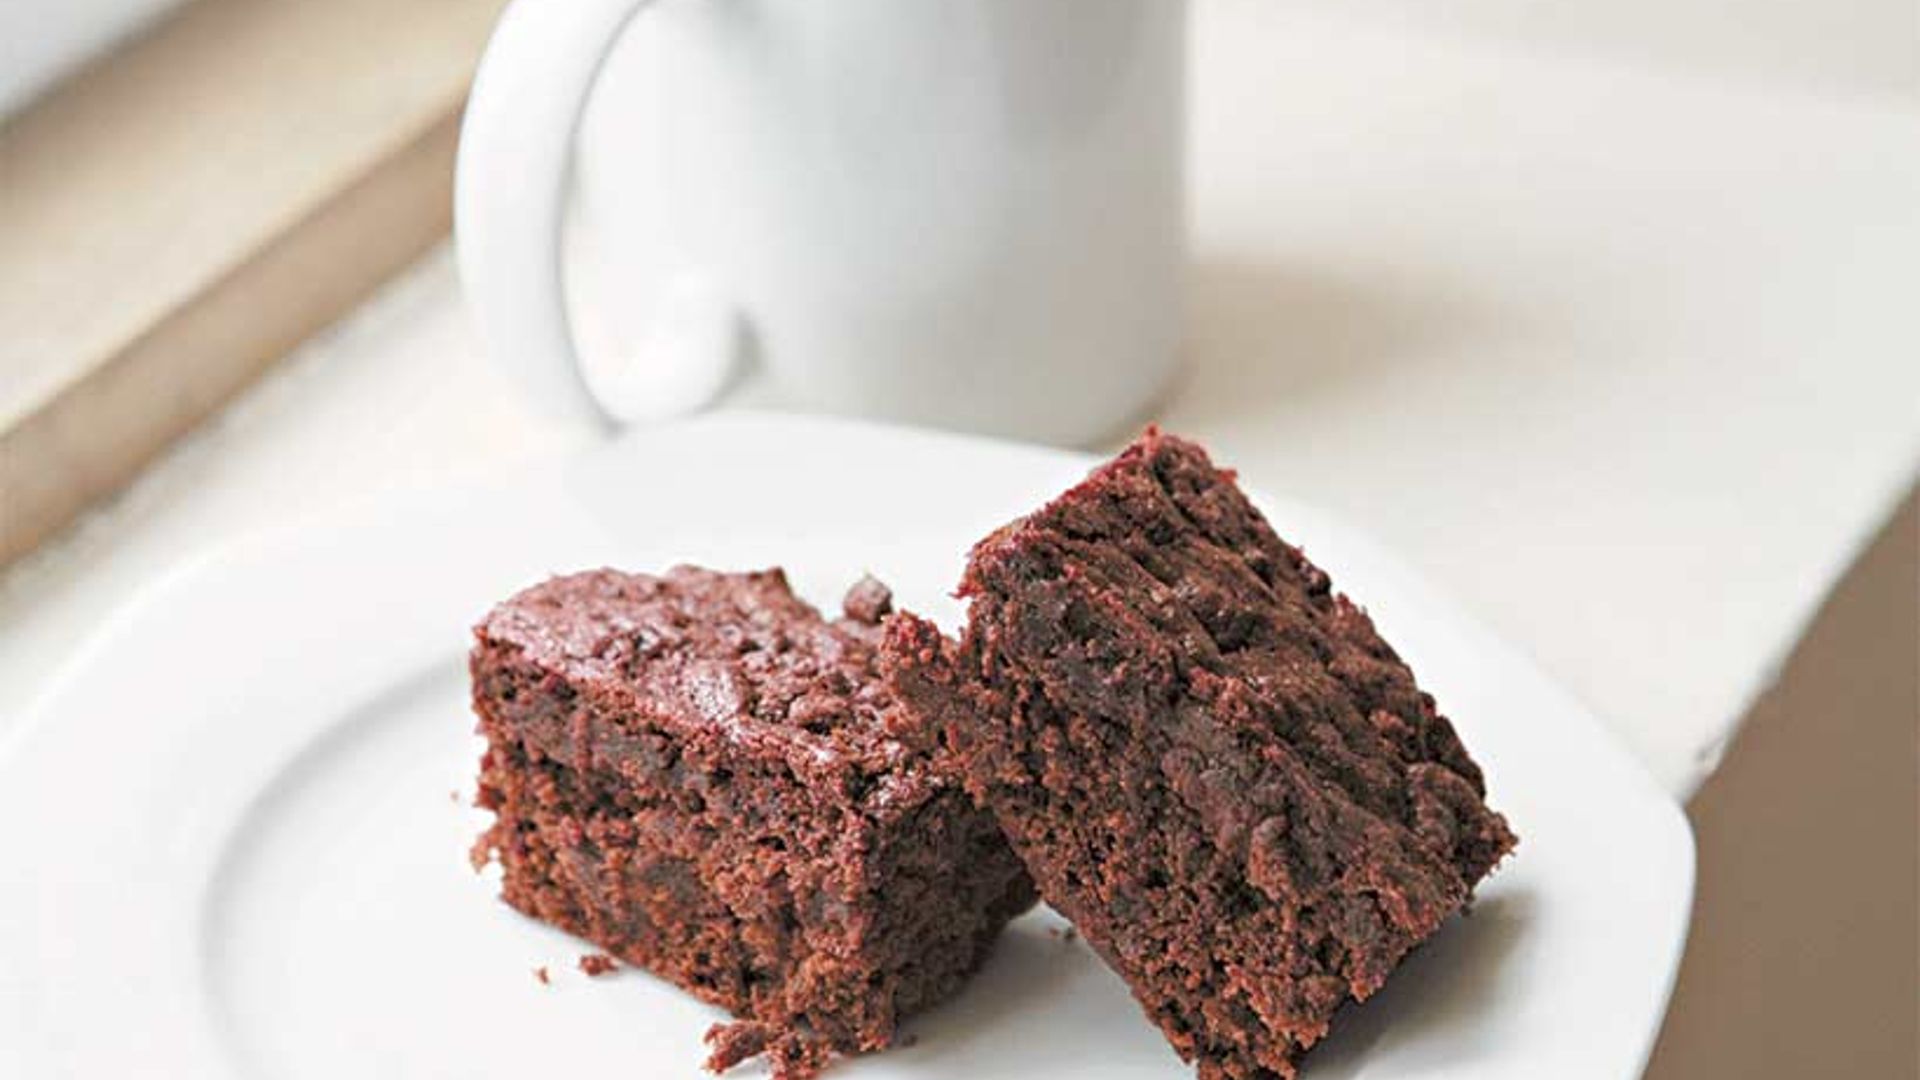 Hugh Fearnley Whittingstall's chocolate and beetroot brownies recipe